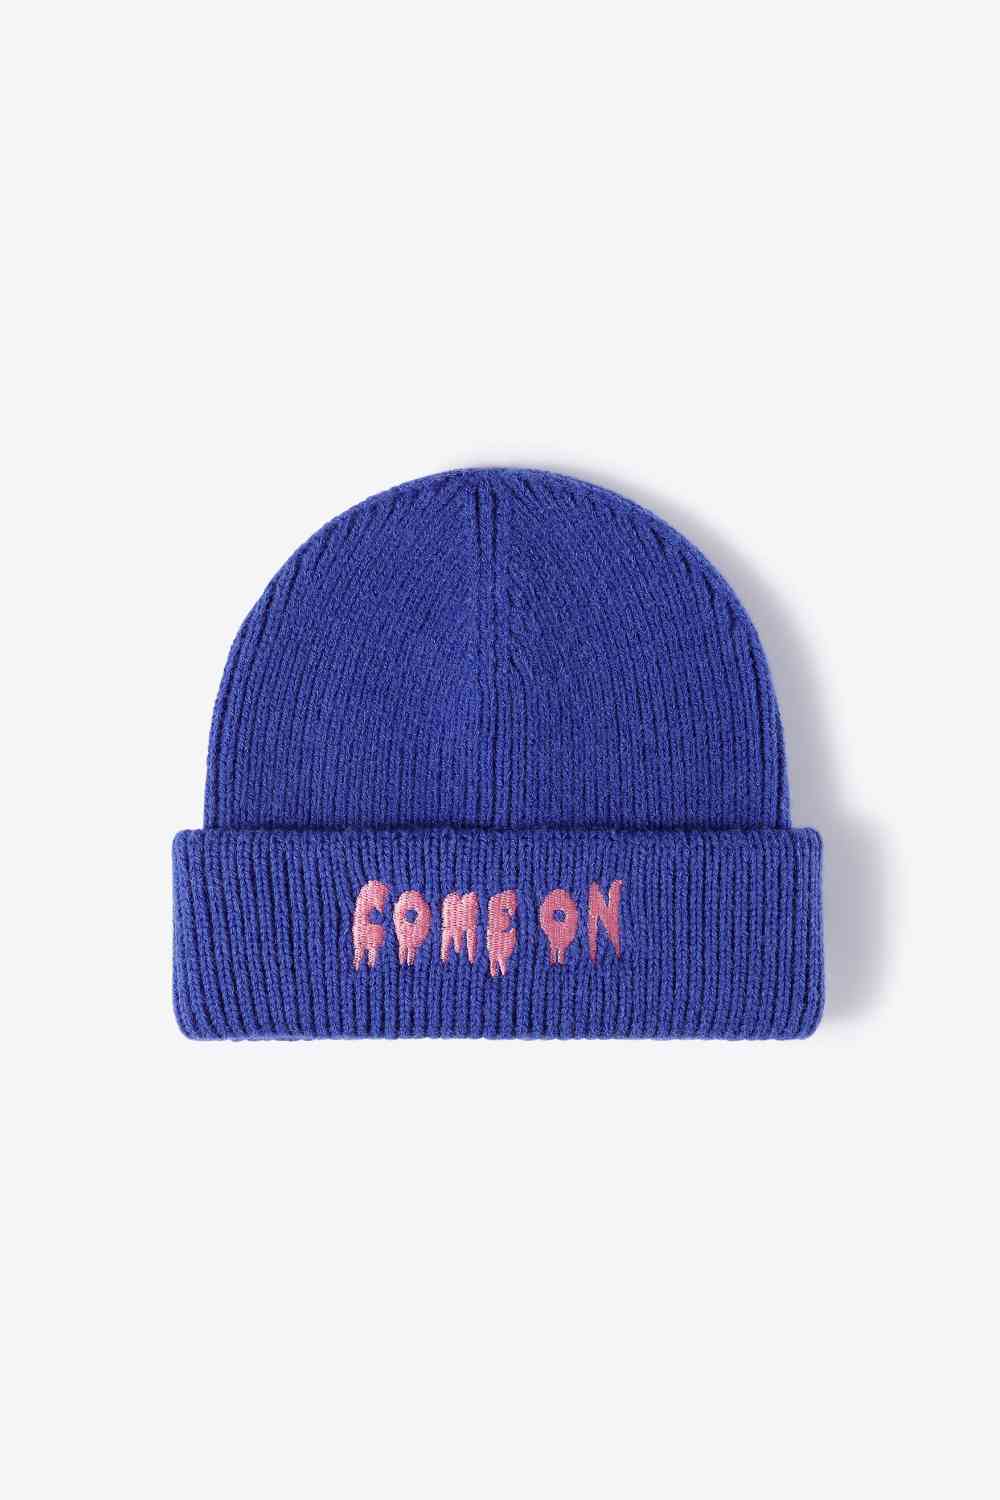 COME ON Embroidered Cuff Knit Beanie Blue One Size